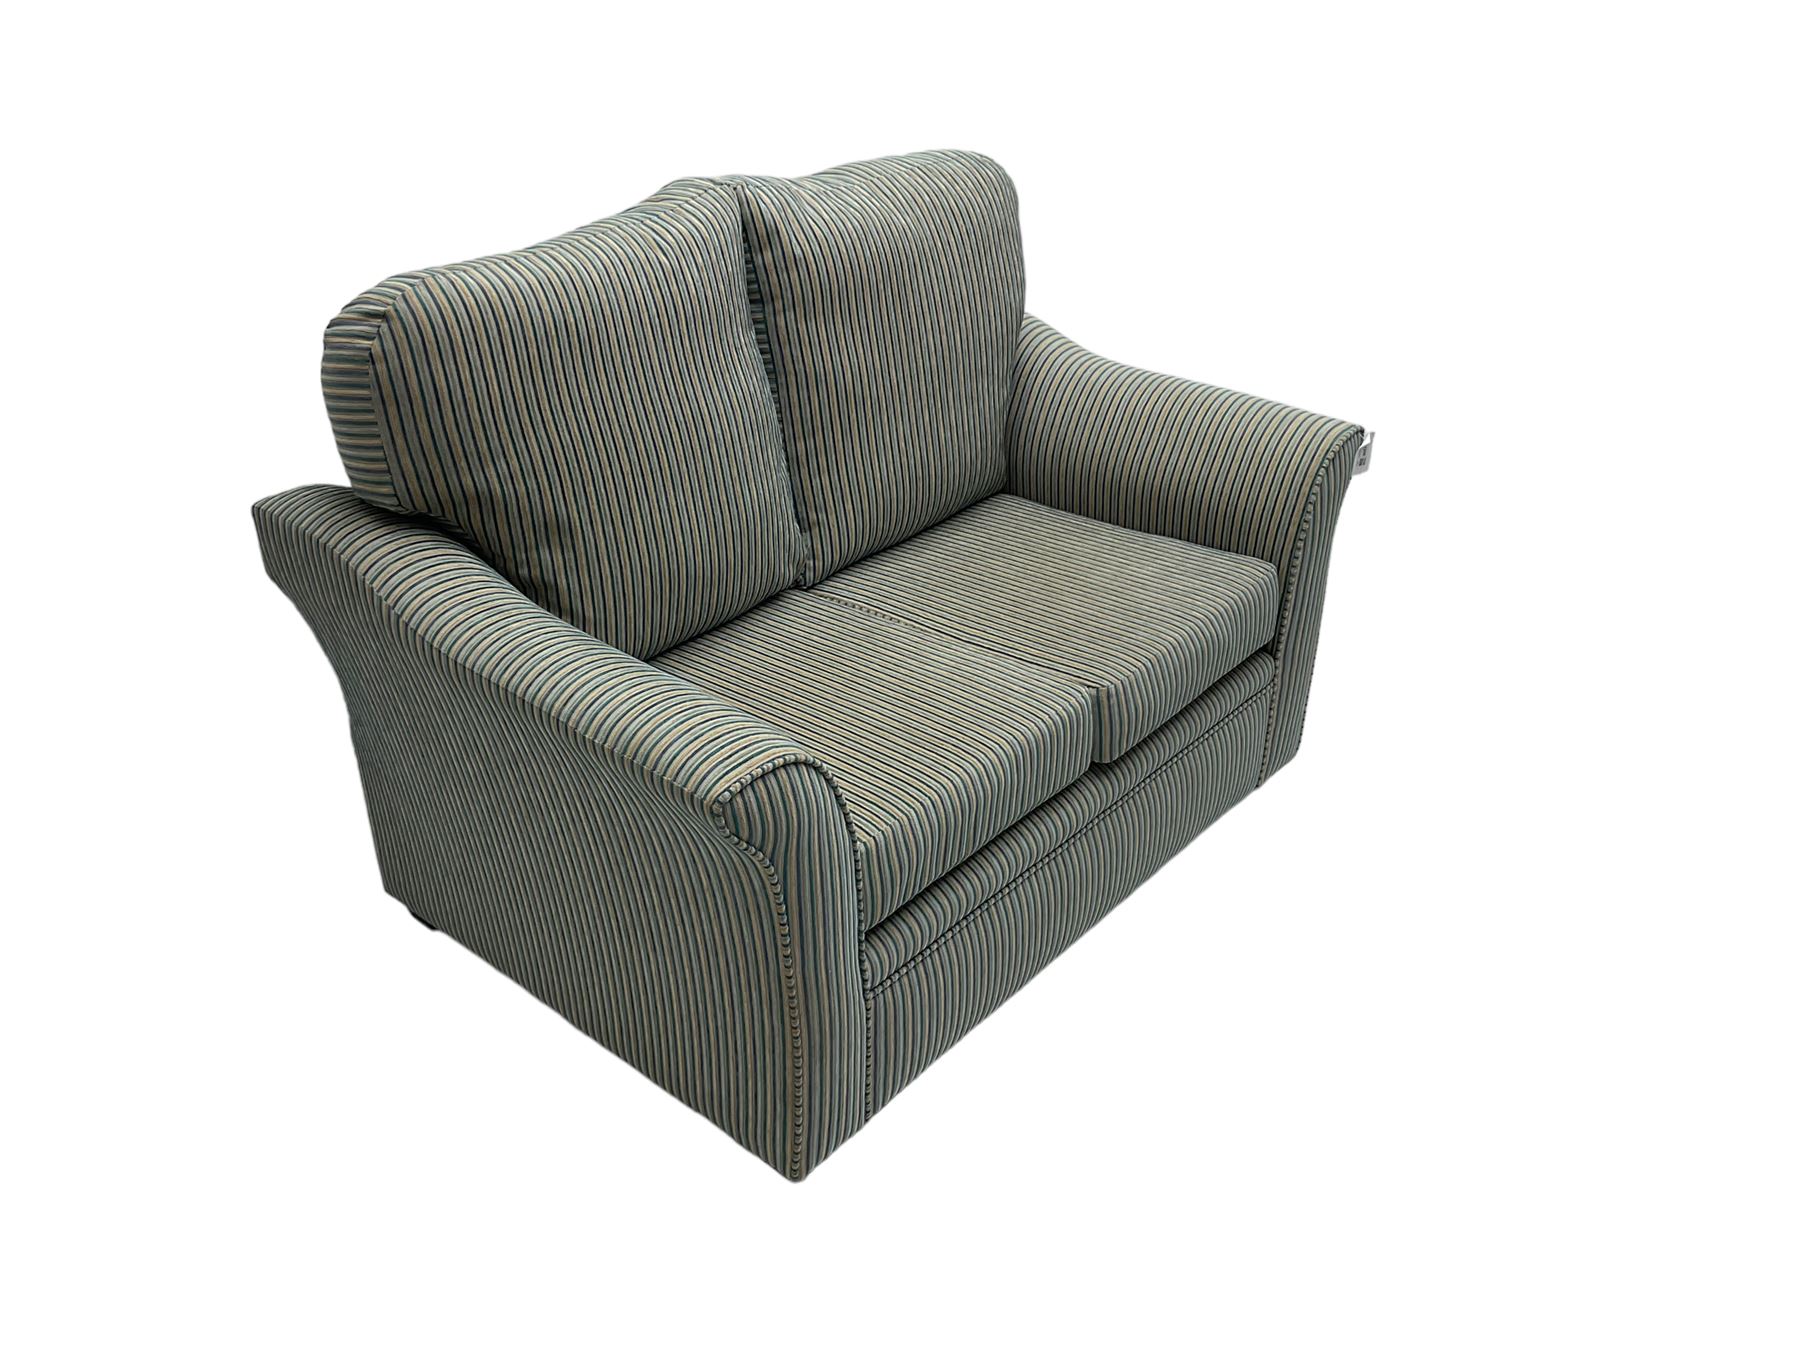 Two seater sofa - Image 4 of 4